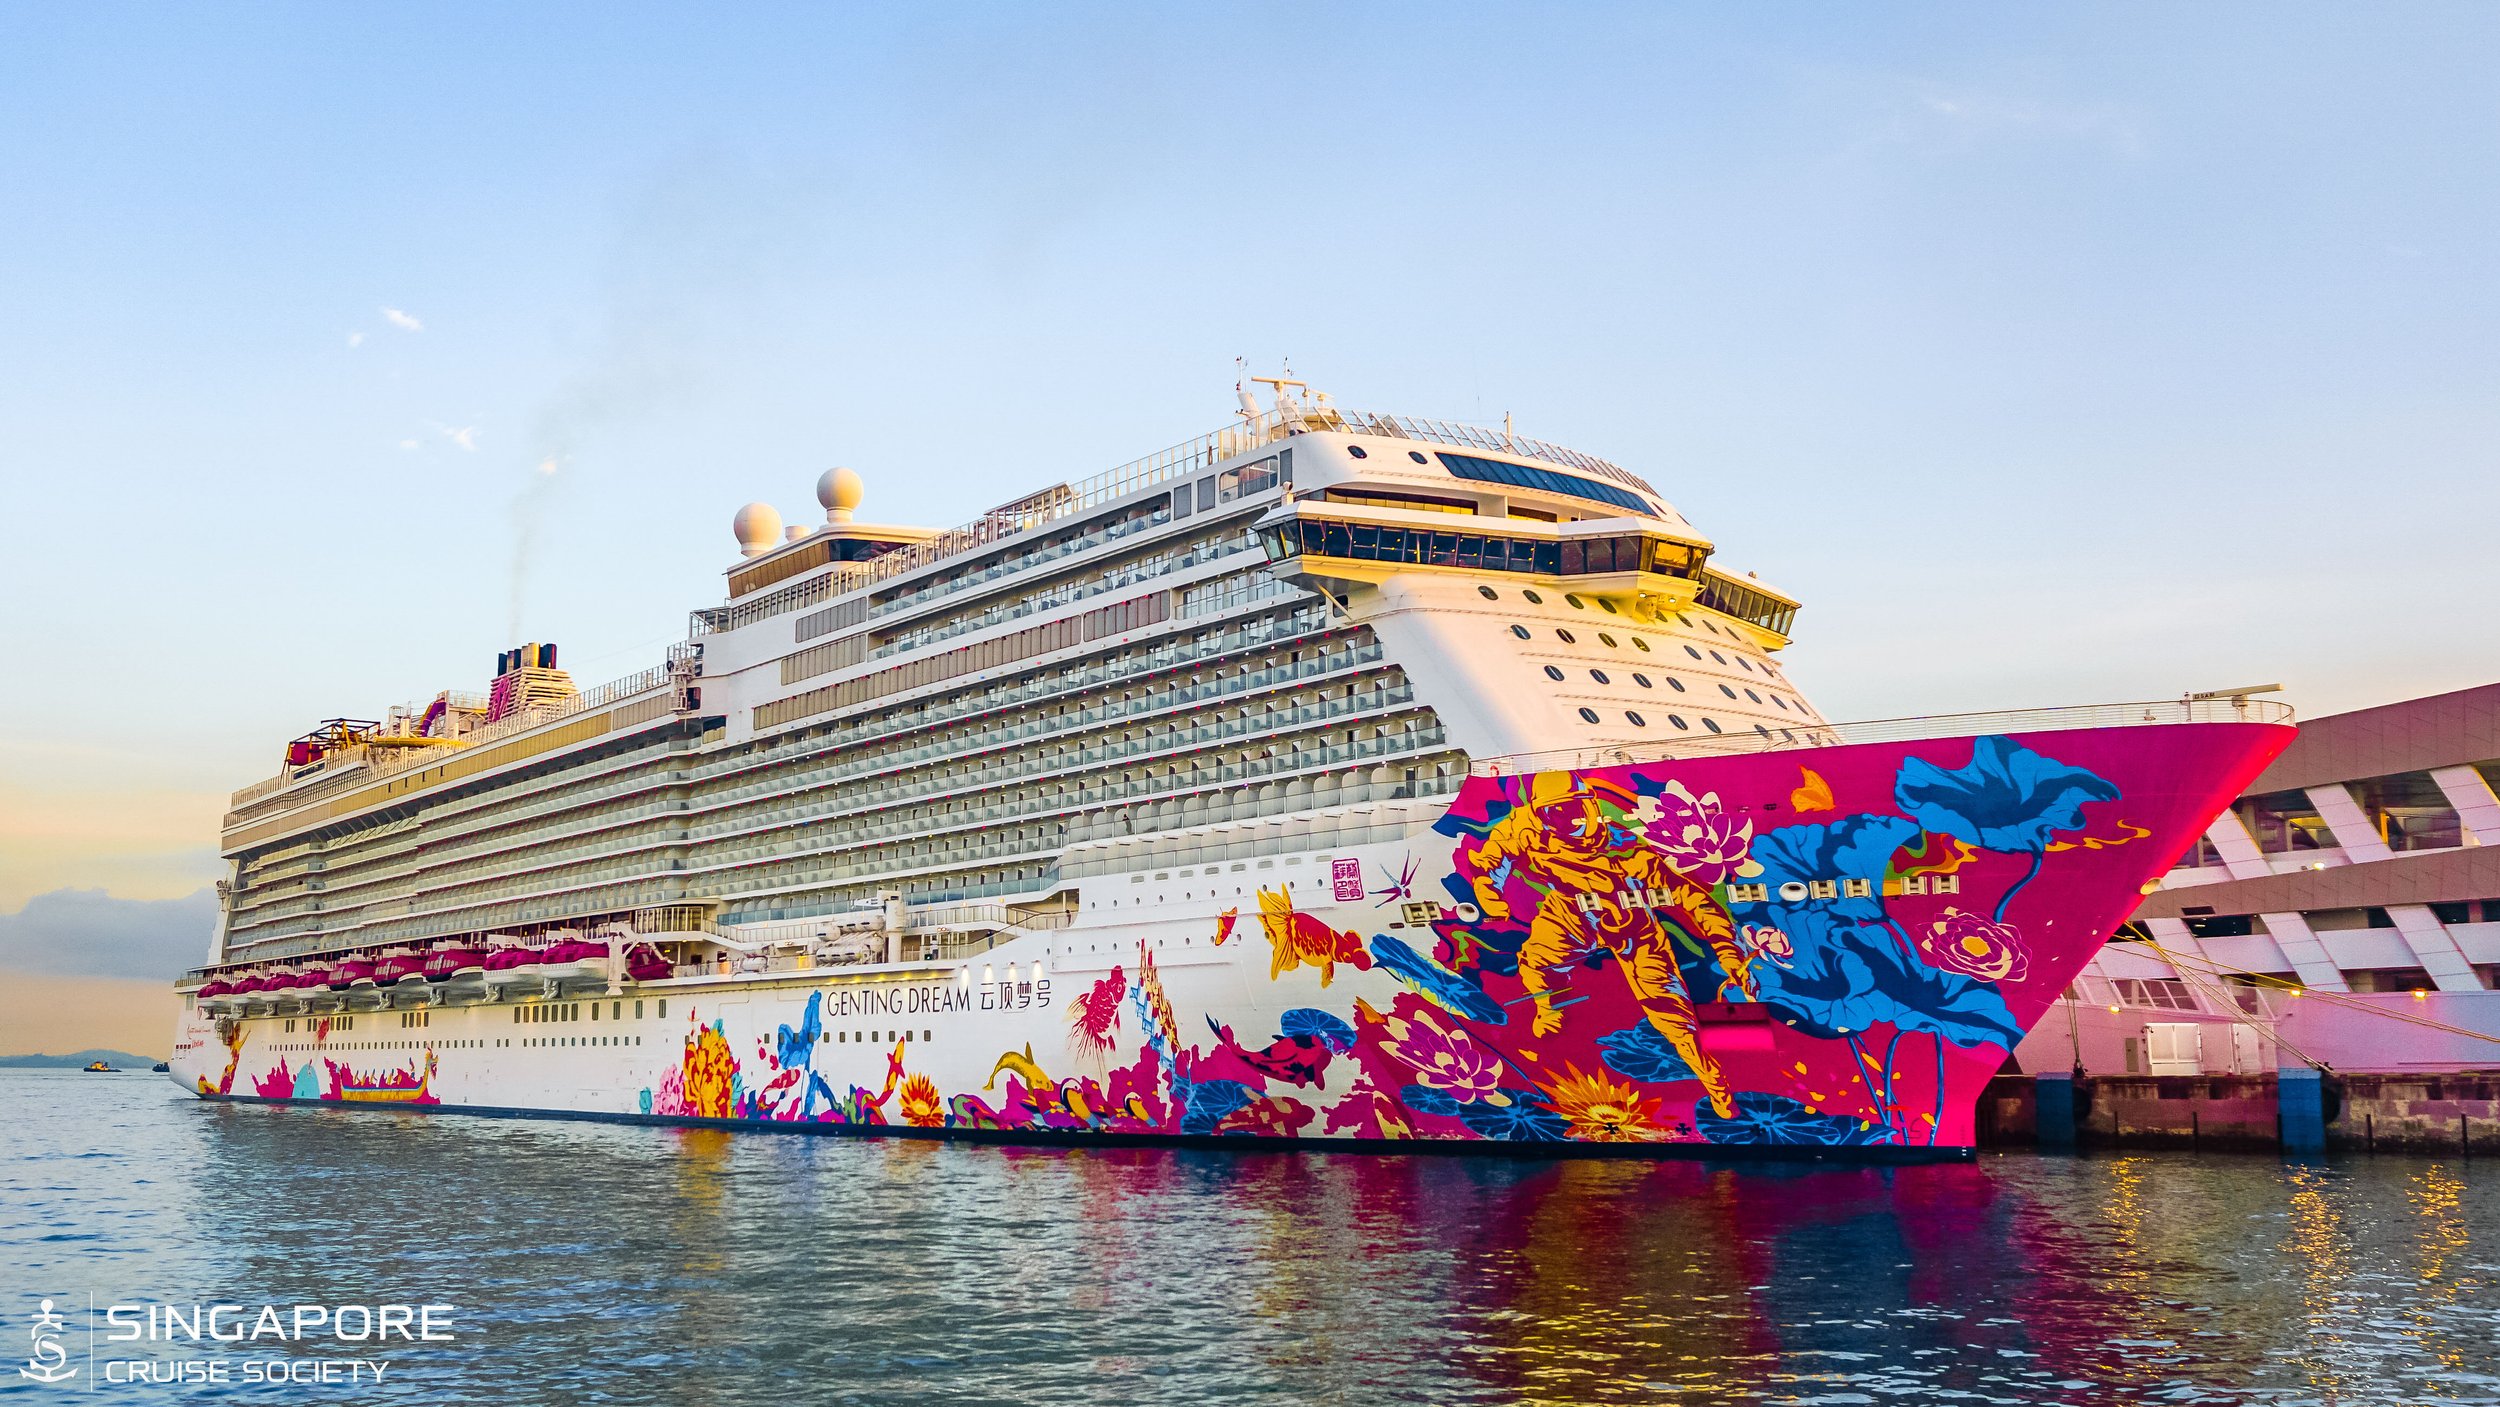 genting dream cruise booking